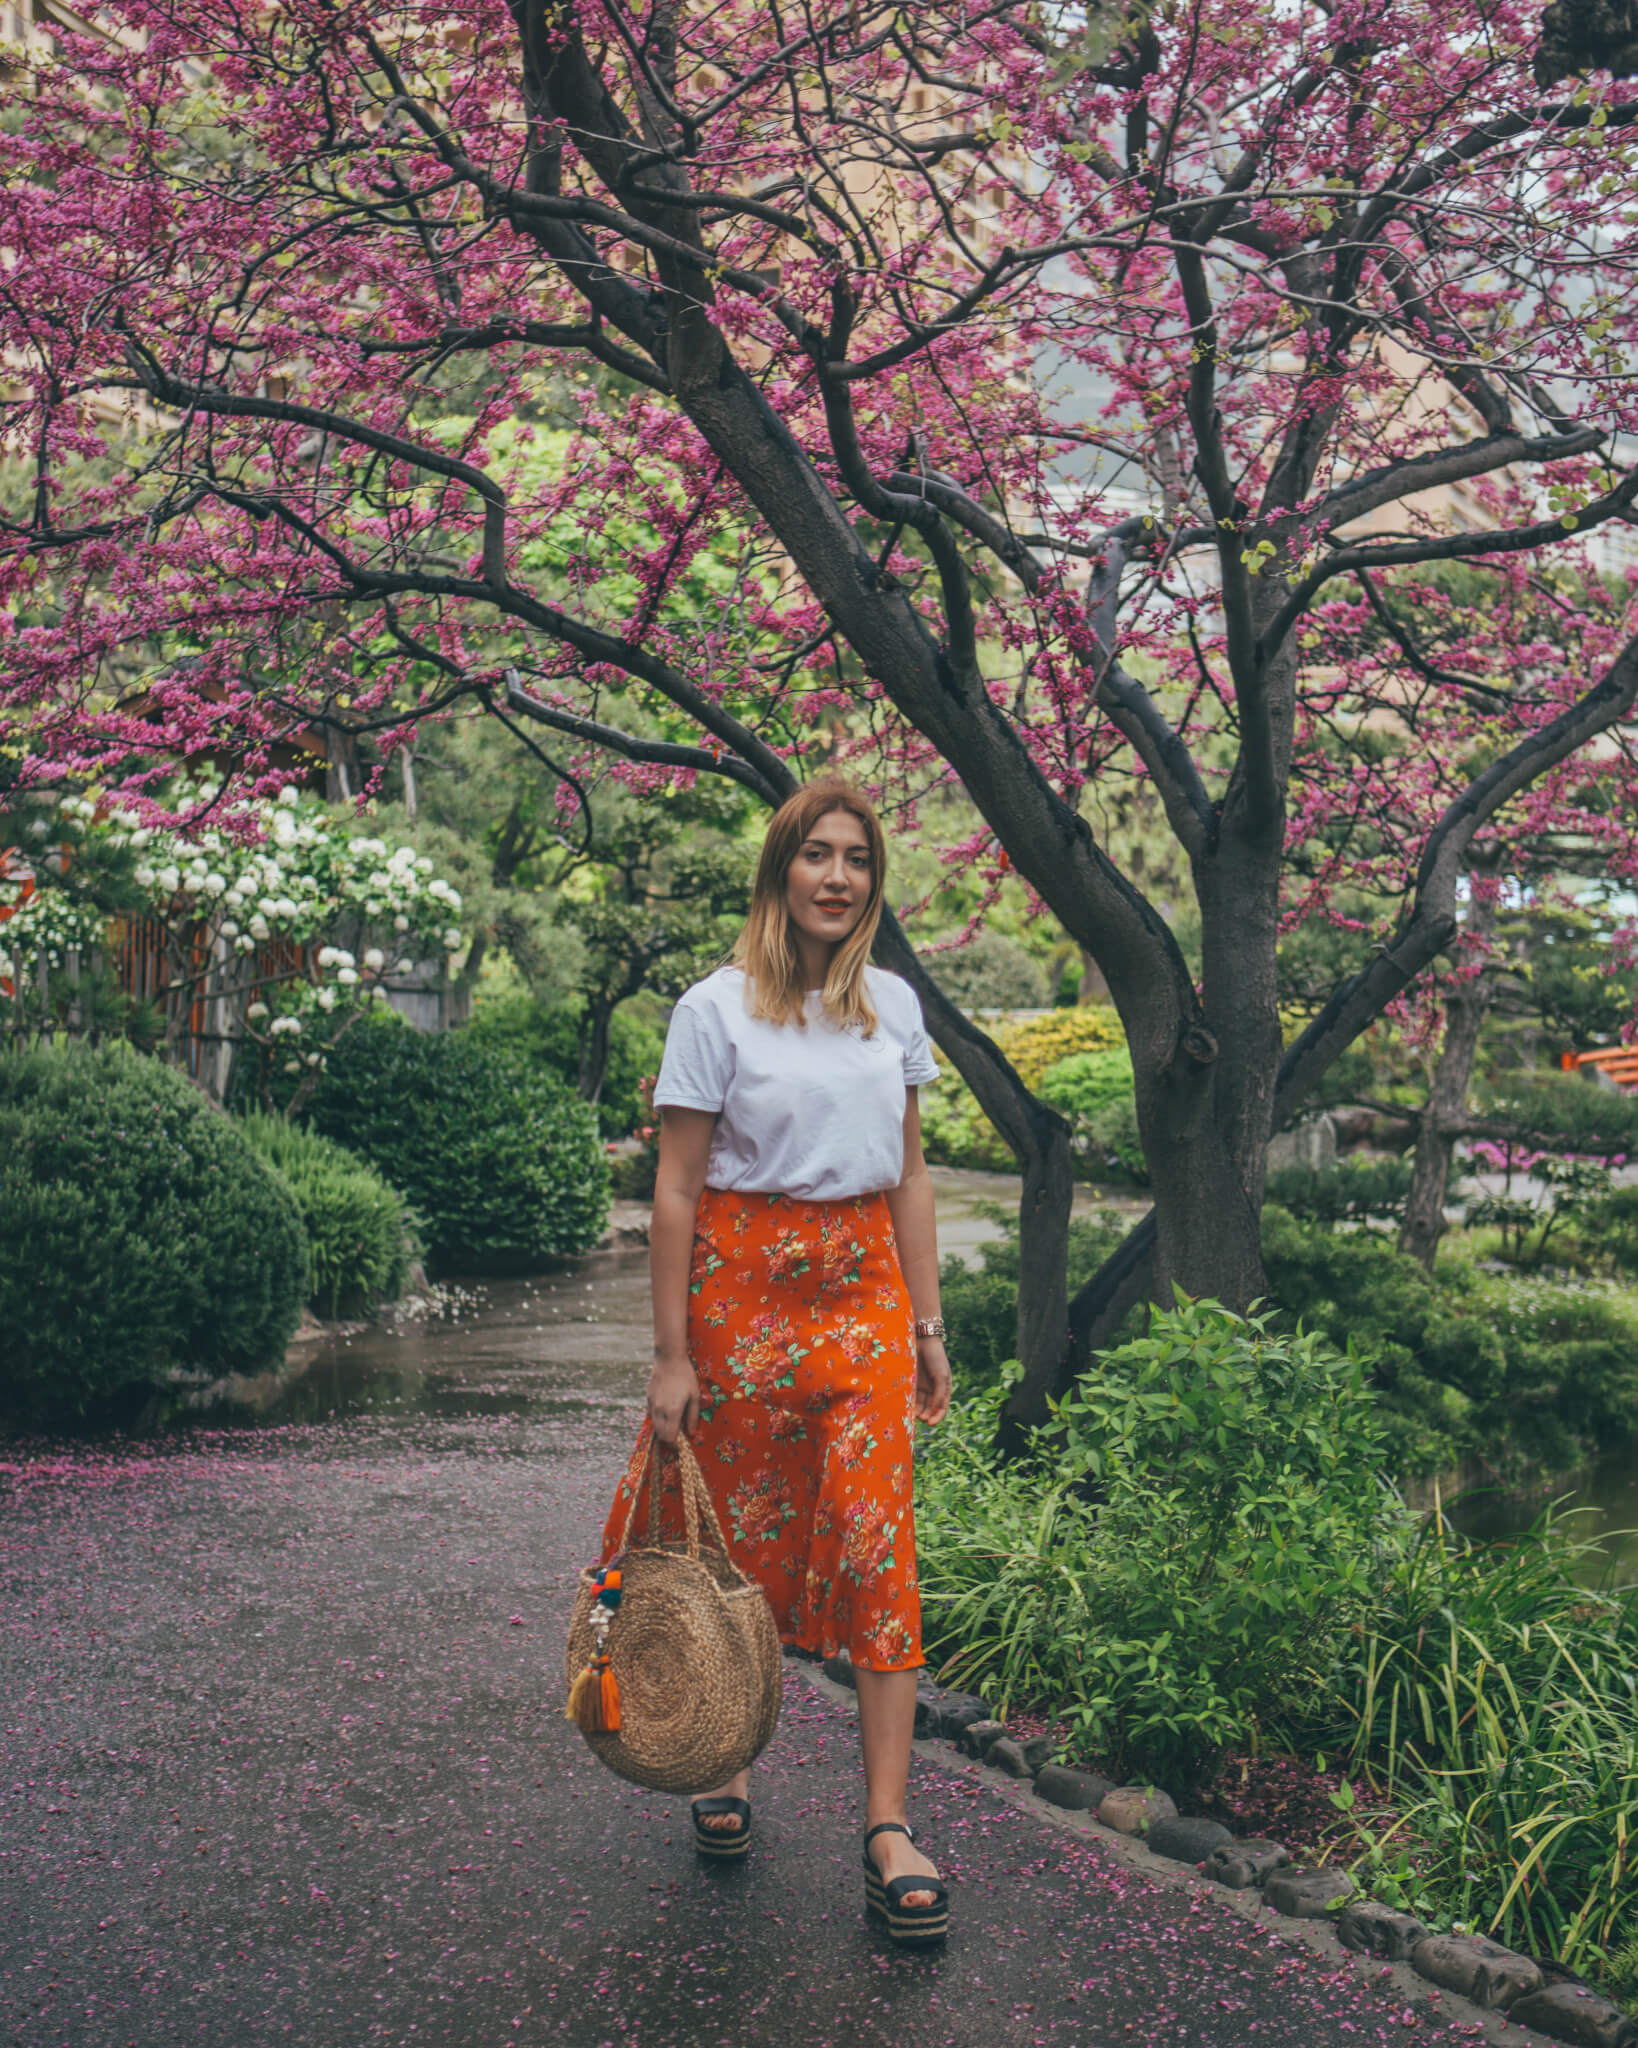 And-Other-Stories-Japanese-Garden-1-of-12-1 Japanese Garden Monaco - What I Wore